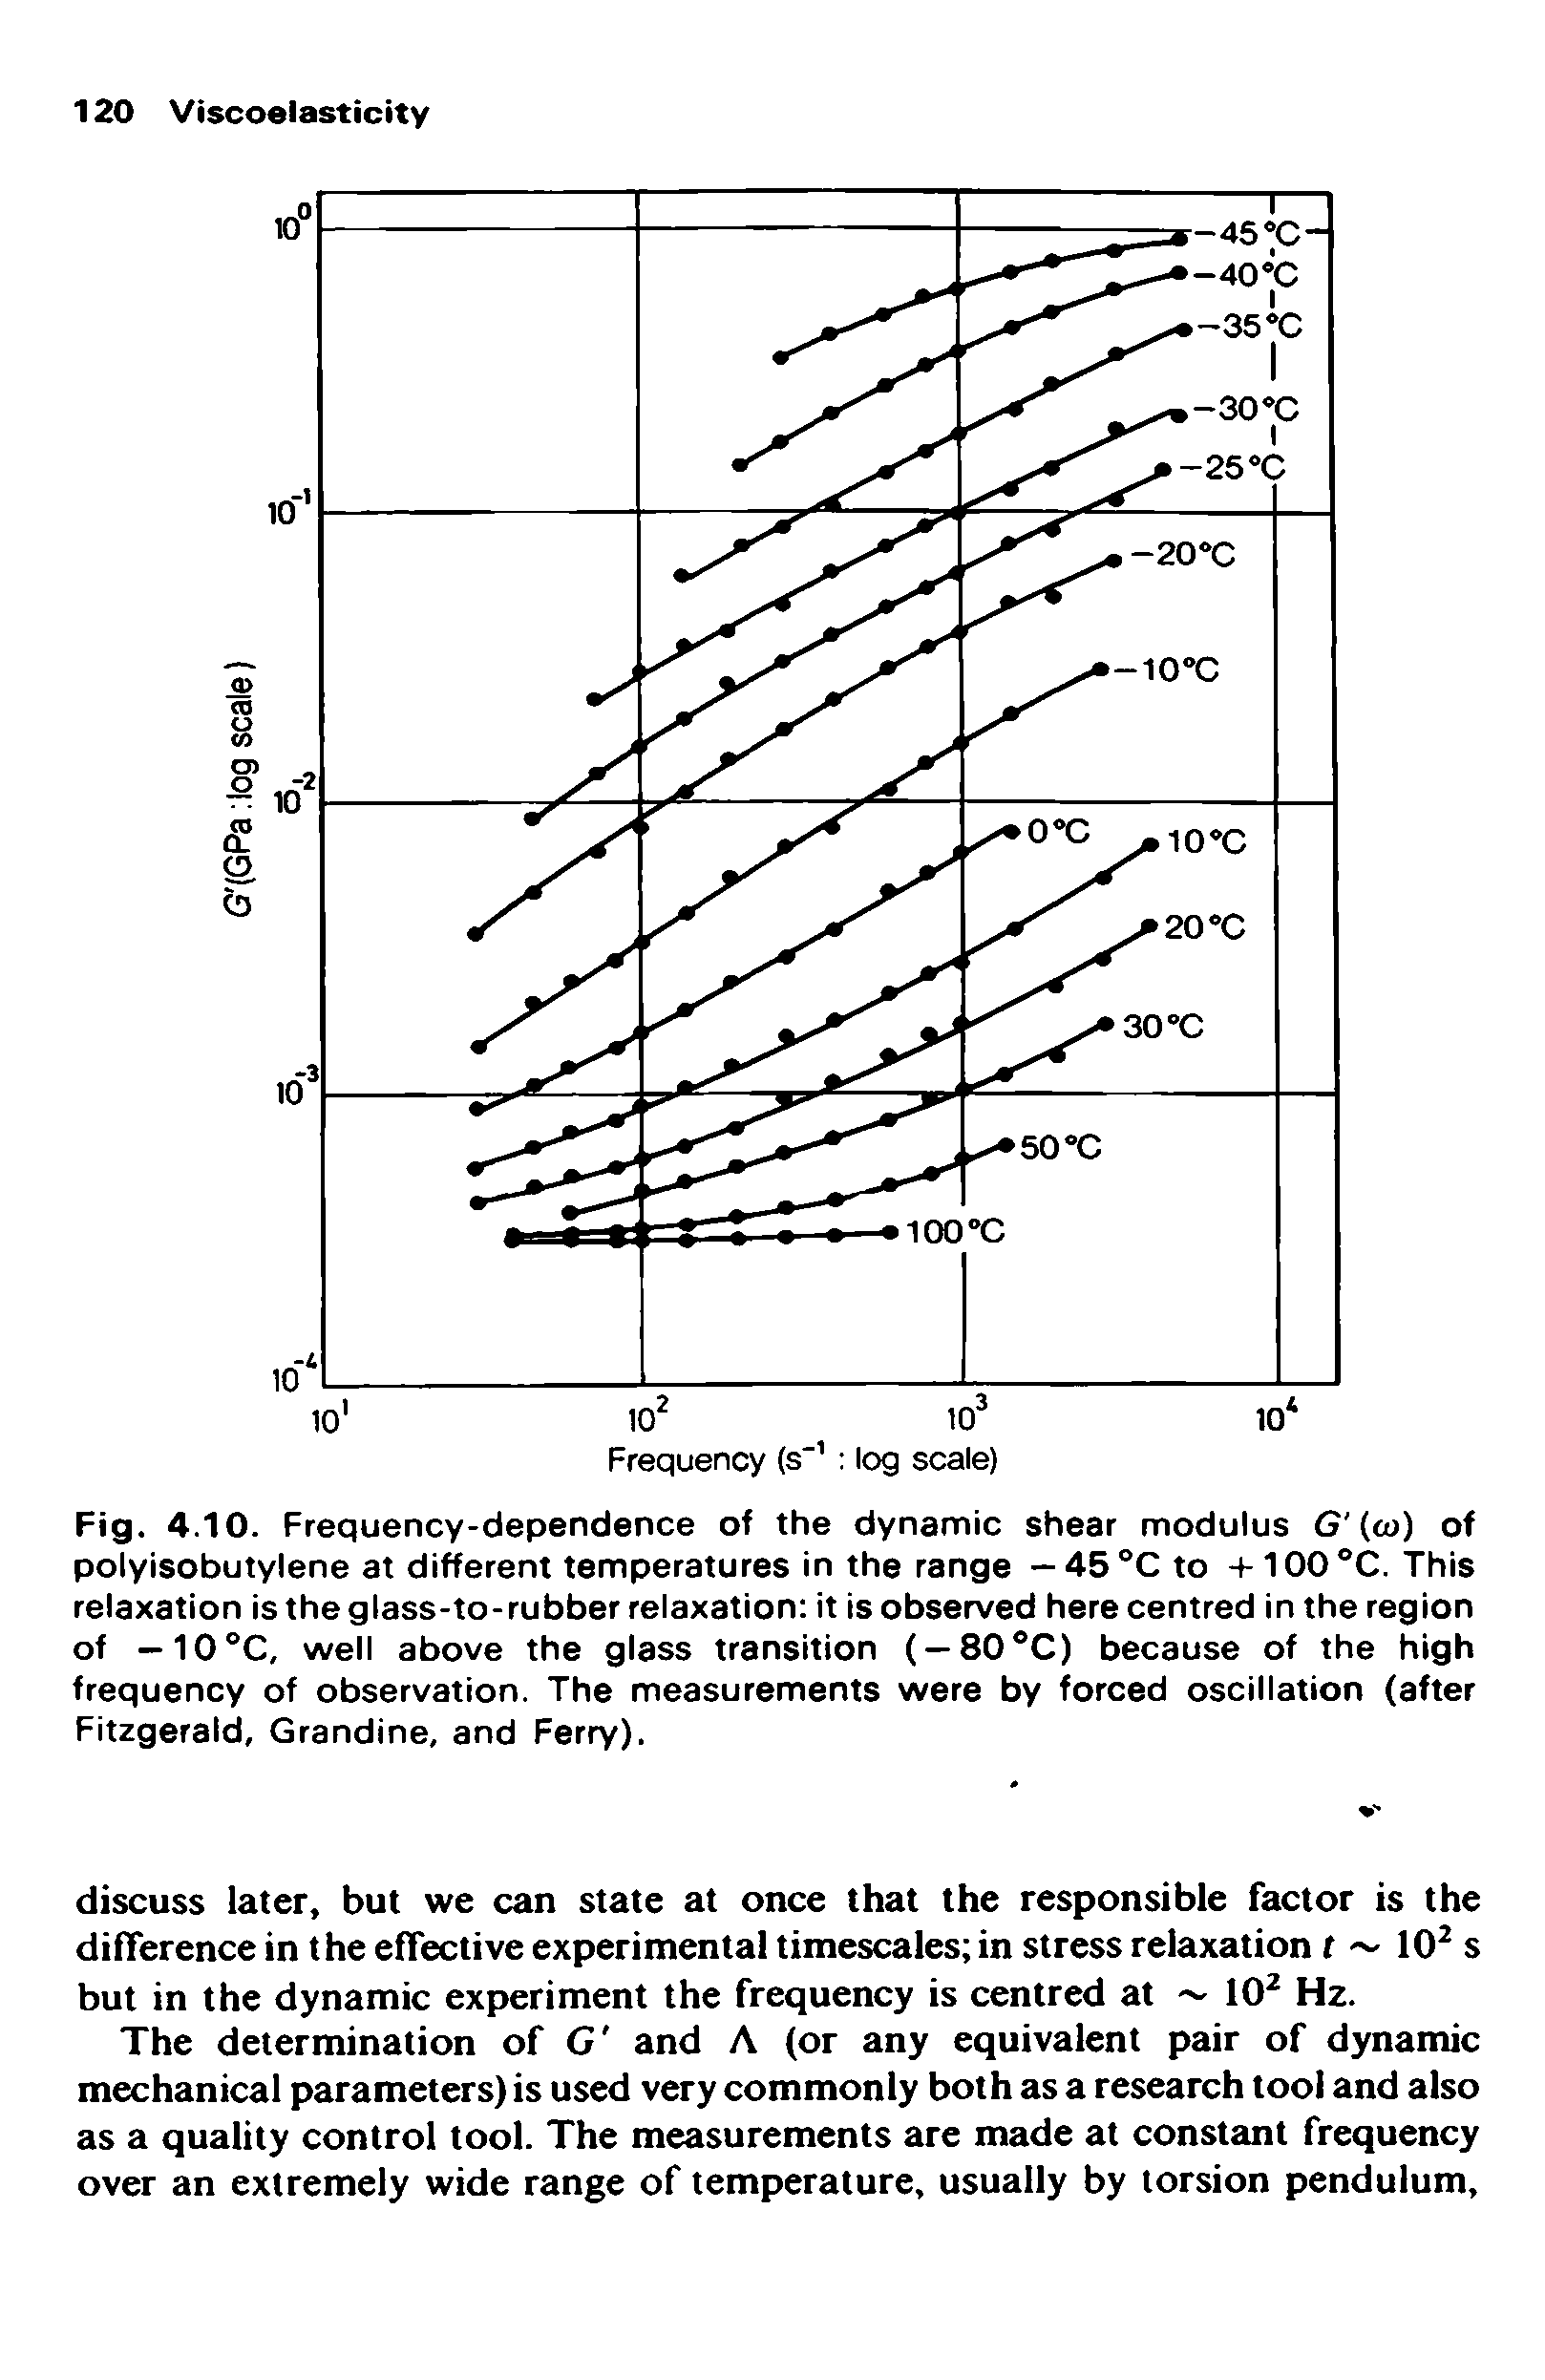 Fig. 4.10. Frequency-dependence of the dynamic shear modulus G <o) of polyisobutylene at different temperatures in the range -45°C to -t-100 C. This relaxation istheglass-to-rubber relaxation it is observed here centred in the region of — 10°C, well above the glass transition ( —80 C) because of the high frequency of observation. The measurements were by forced oscillation (after Fitzgerald, Grandine, and Ferry).